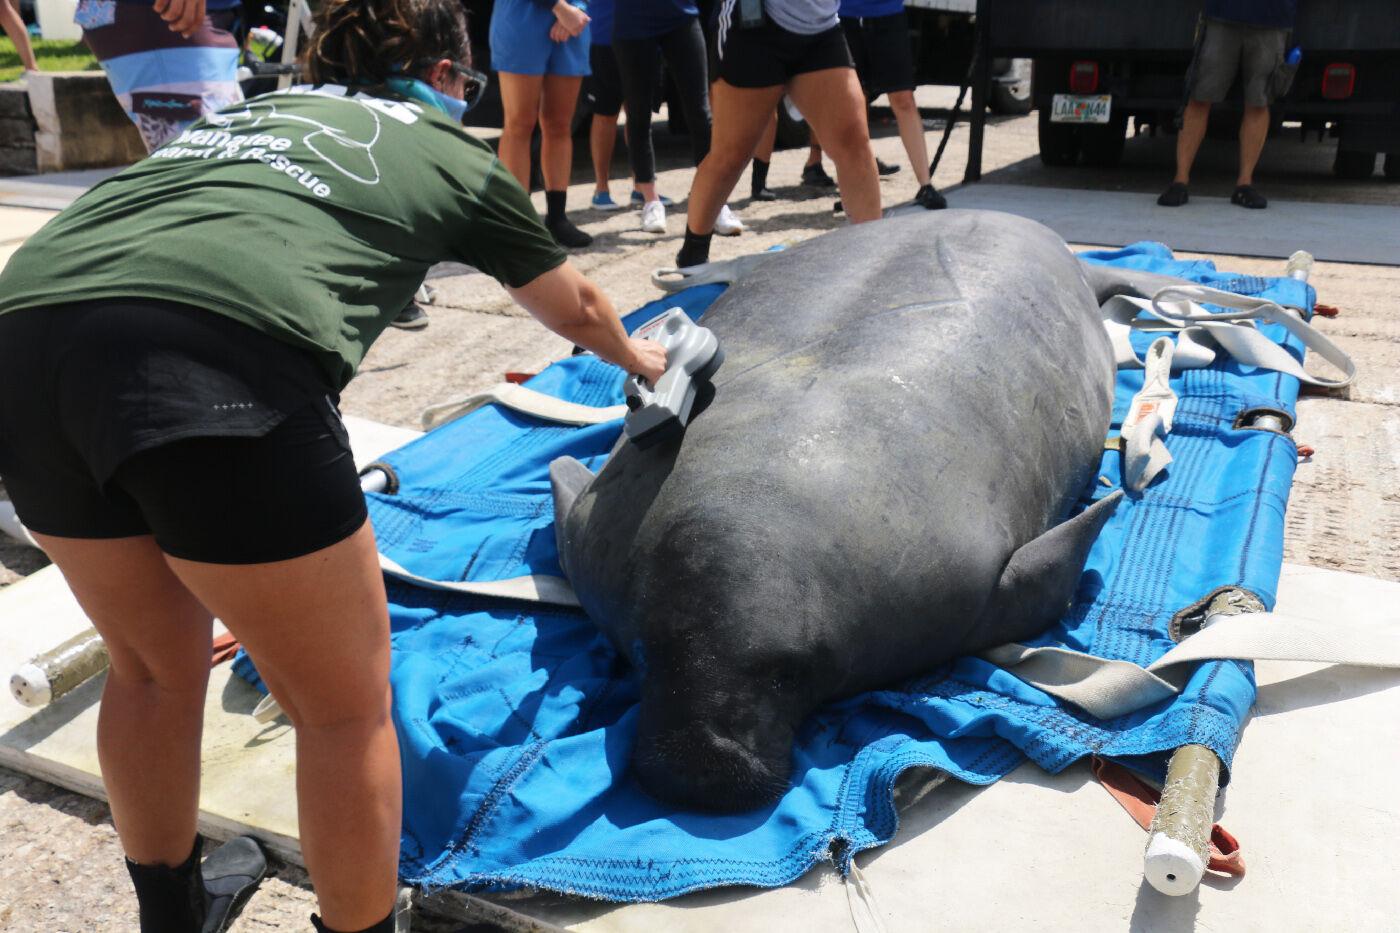 "Chessie" the Manatee Resurfaces after Apparent Gator Attack